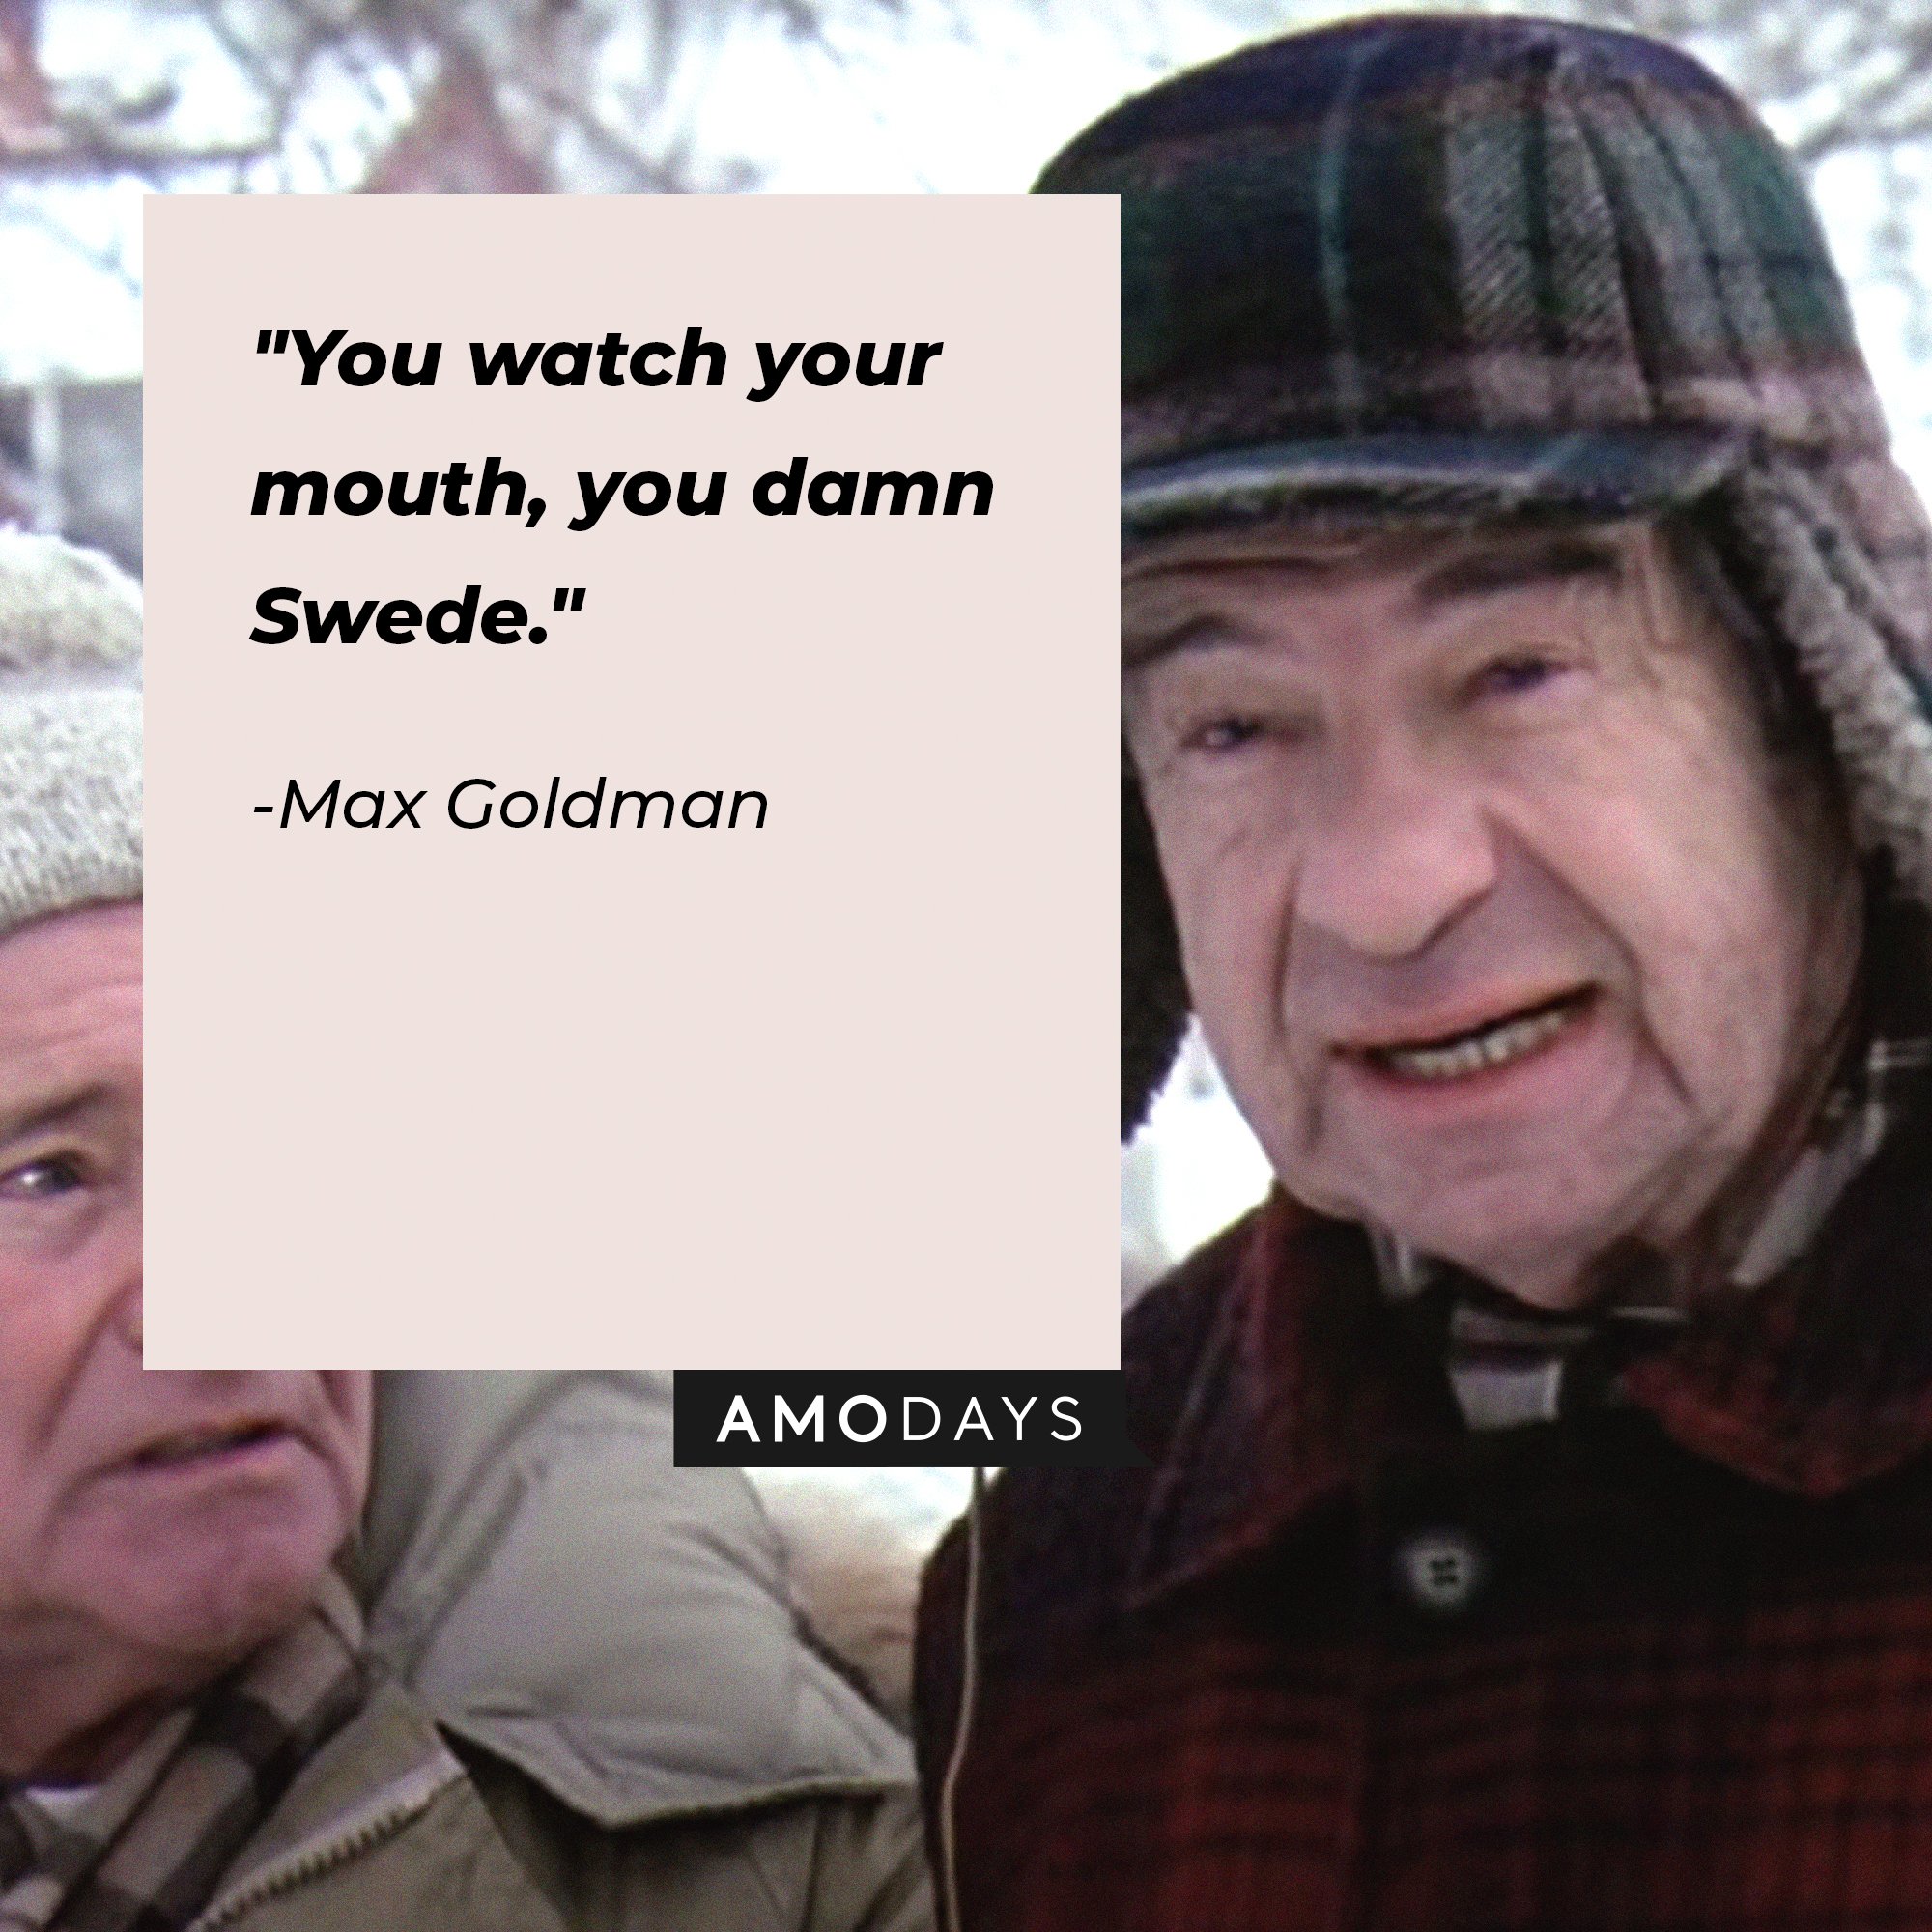 Max Goldman’s quote: "You watch your mouth, you damn Swede." | Image: AmoDays